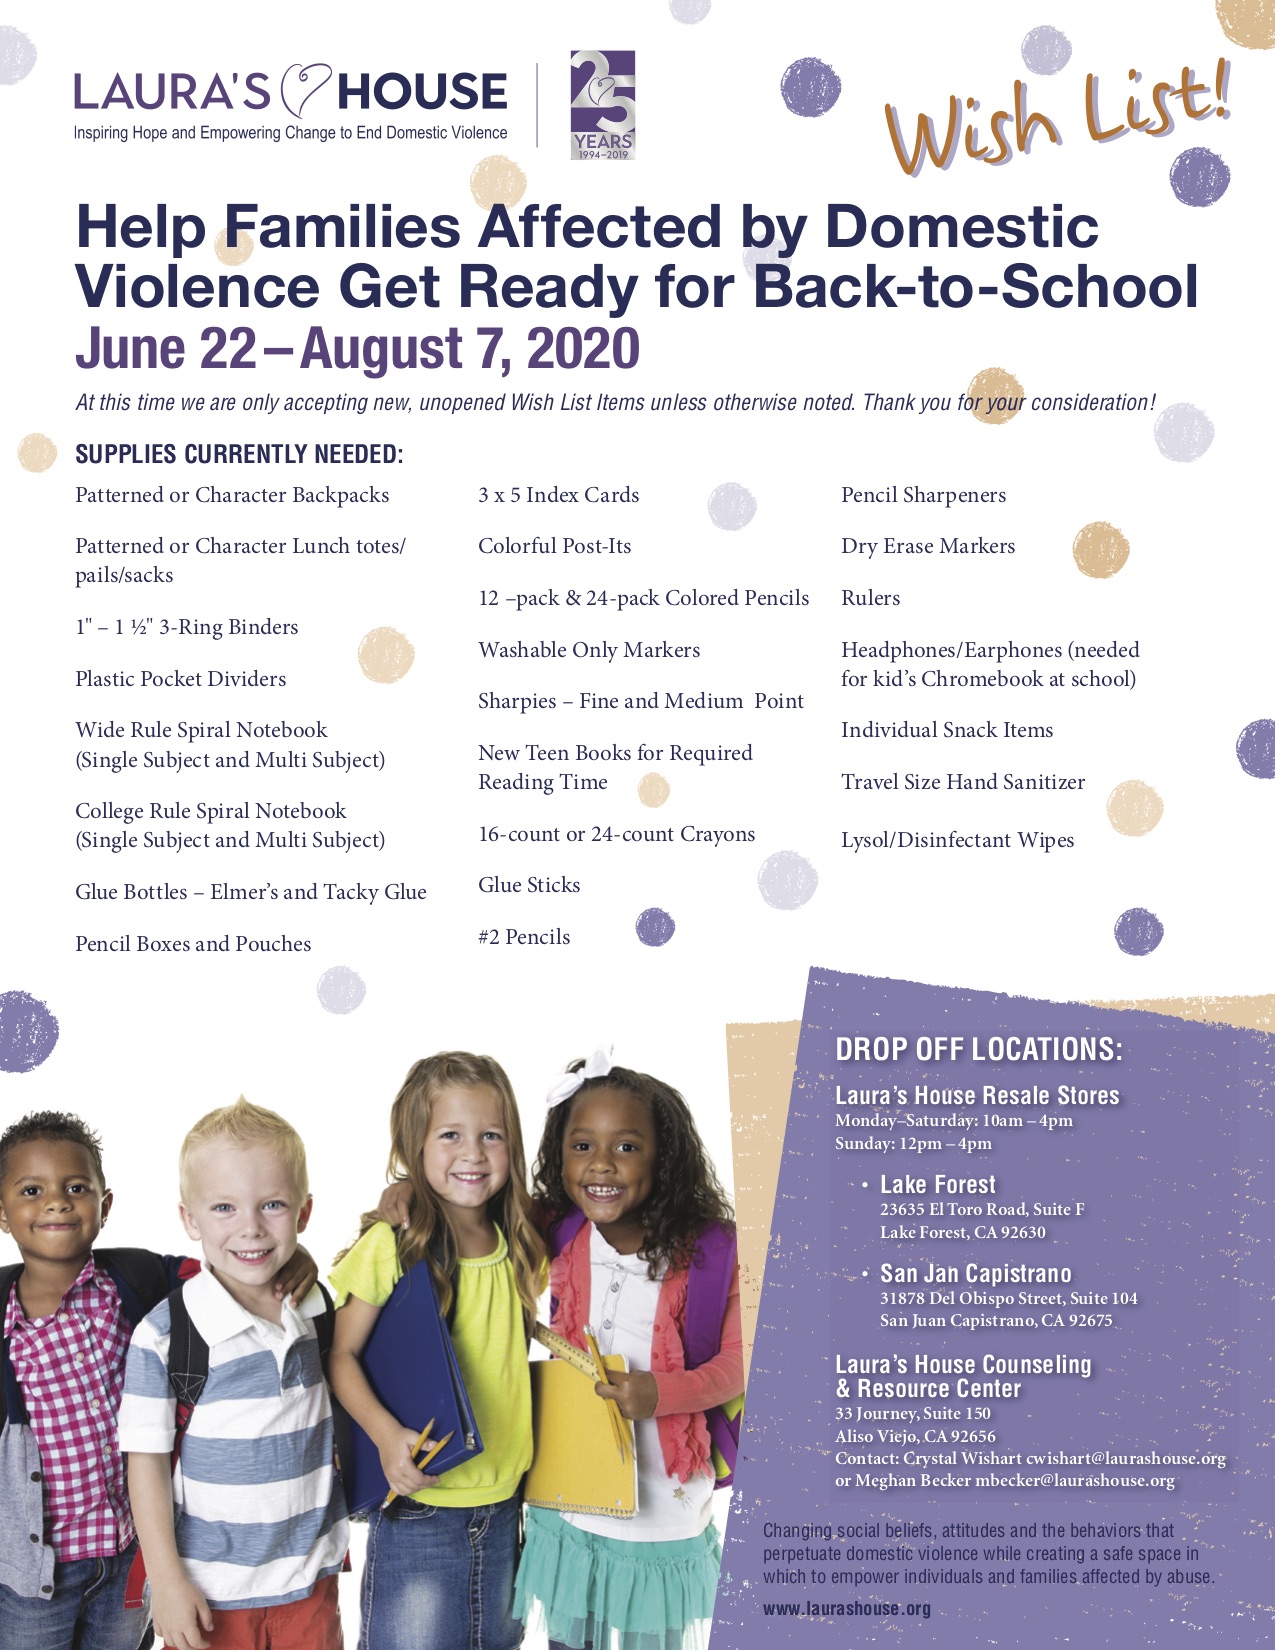 Help Families Affected by Domestic Violence Get Ready for Back-to-School